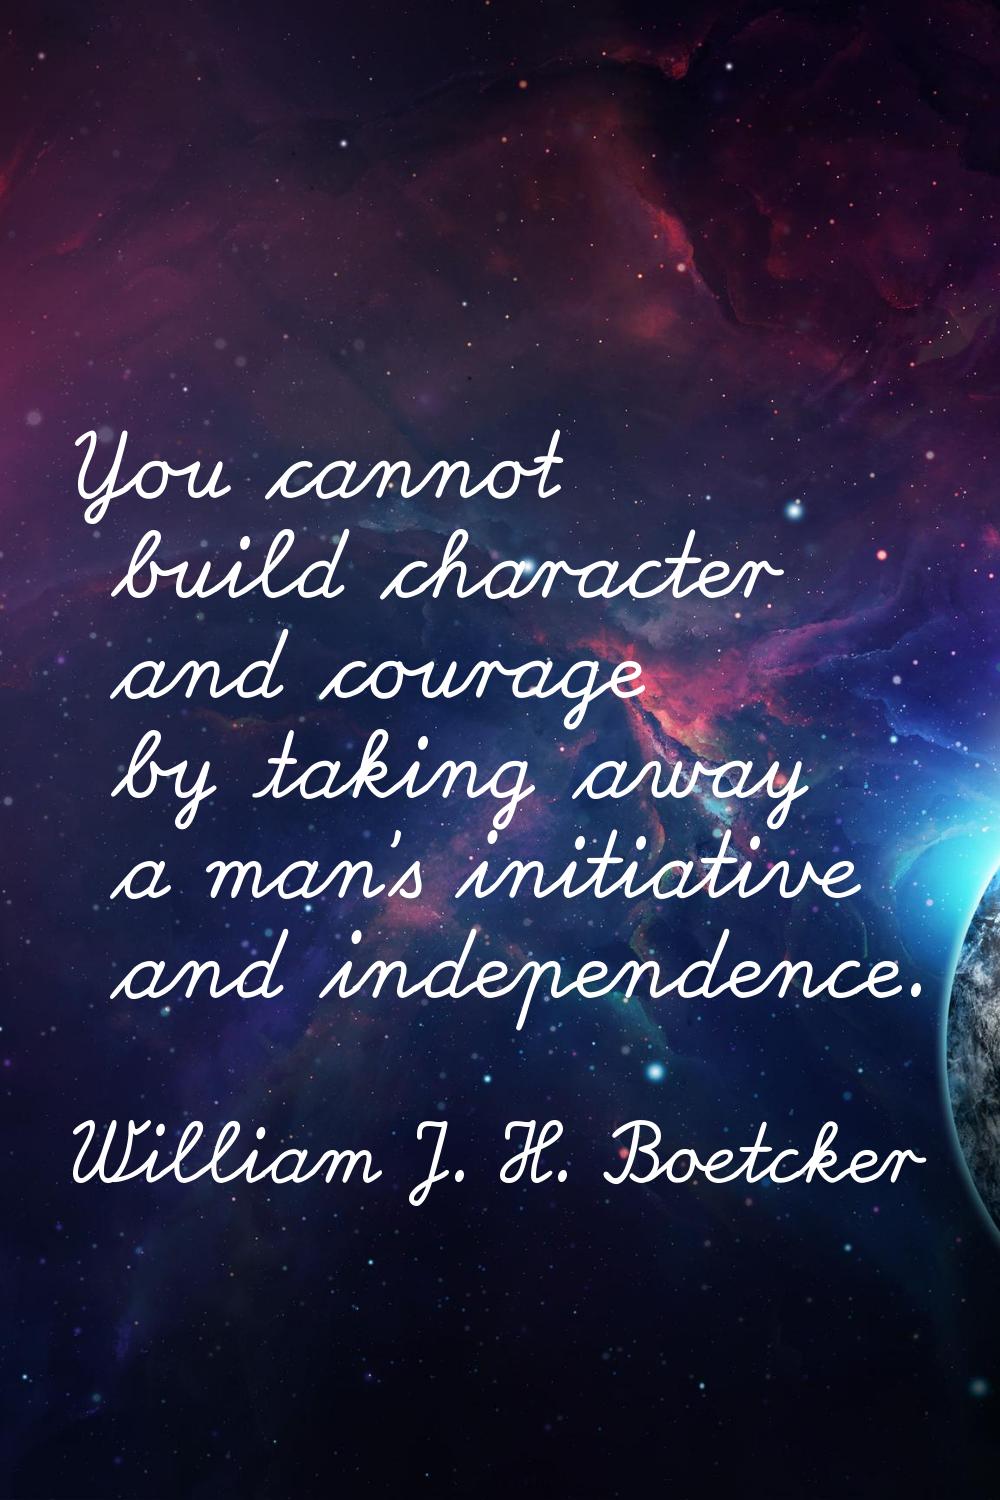 You cannot build character and courage by taking away a man's initiative and independence.